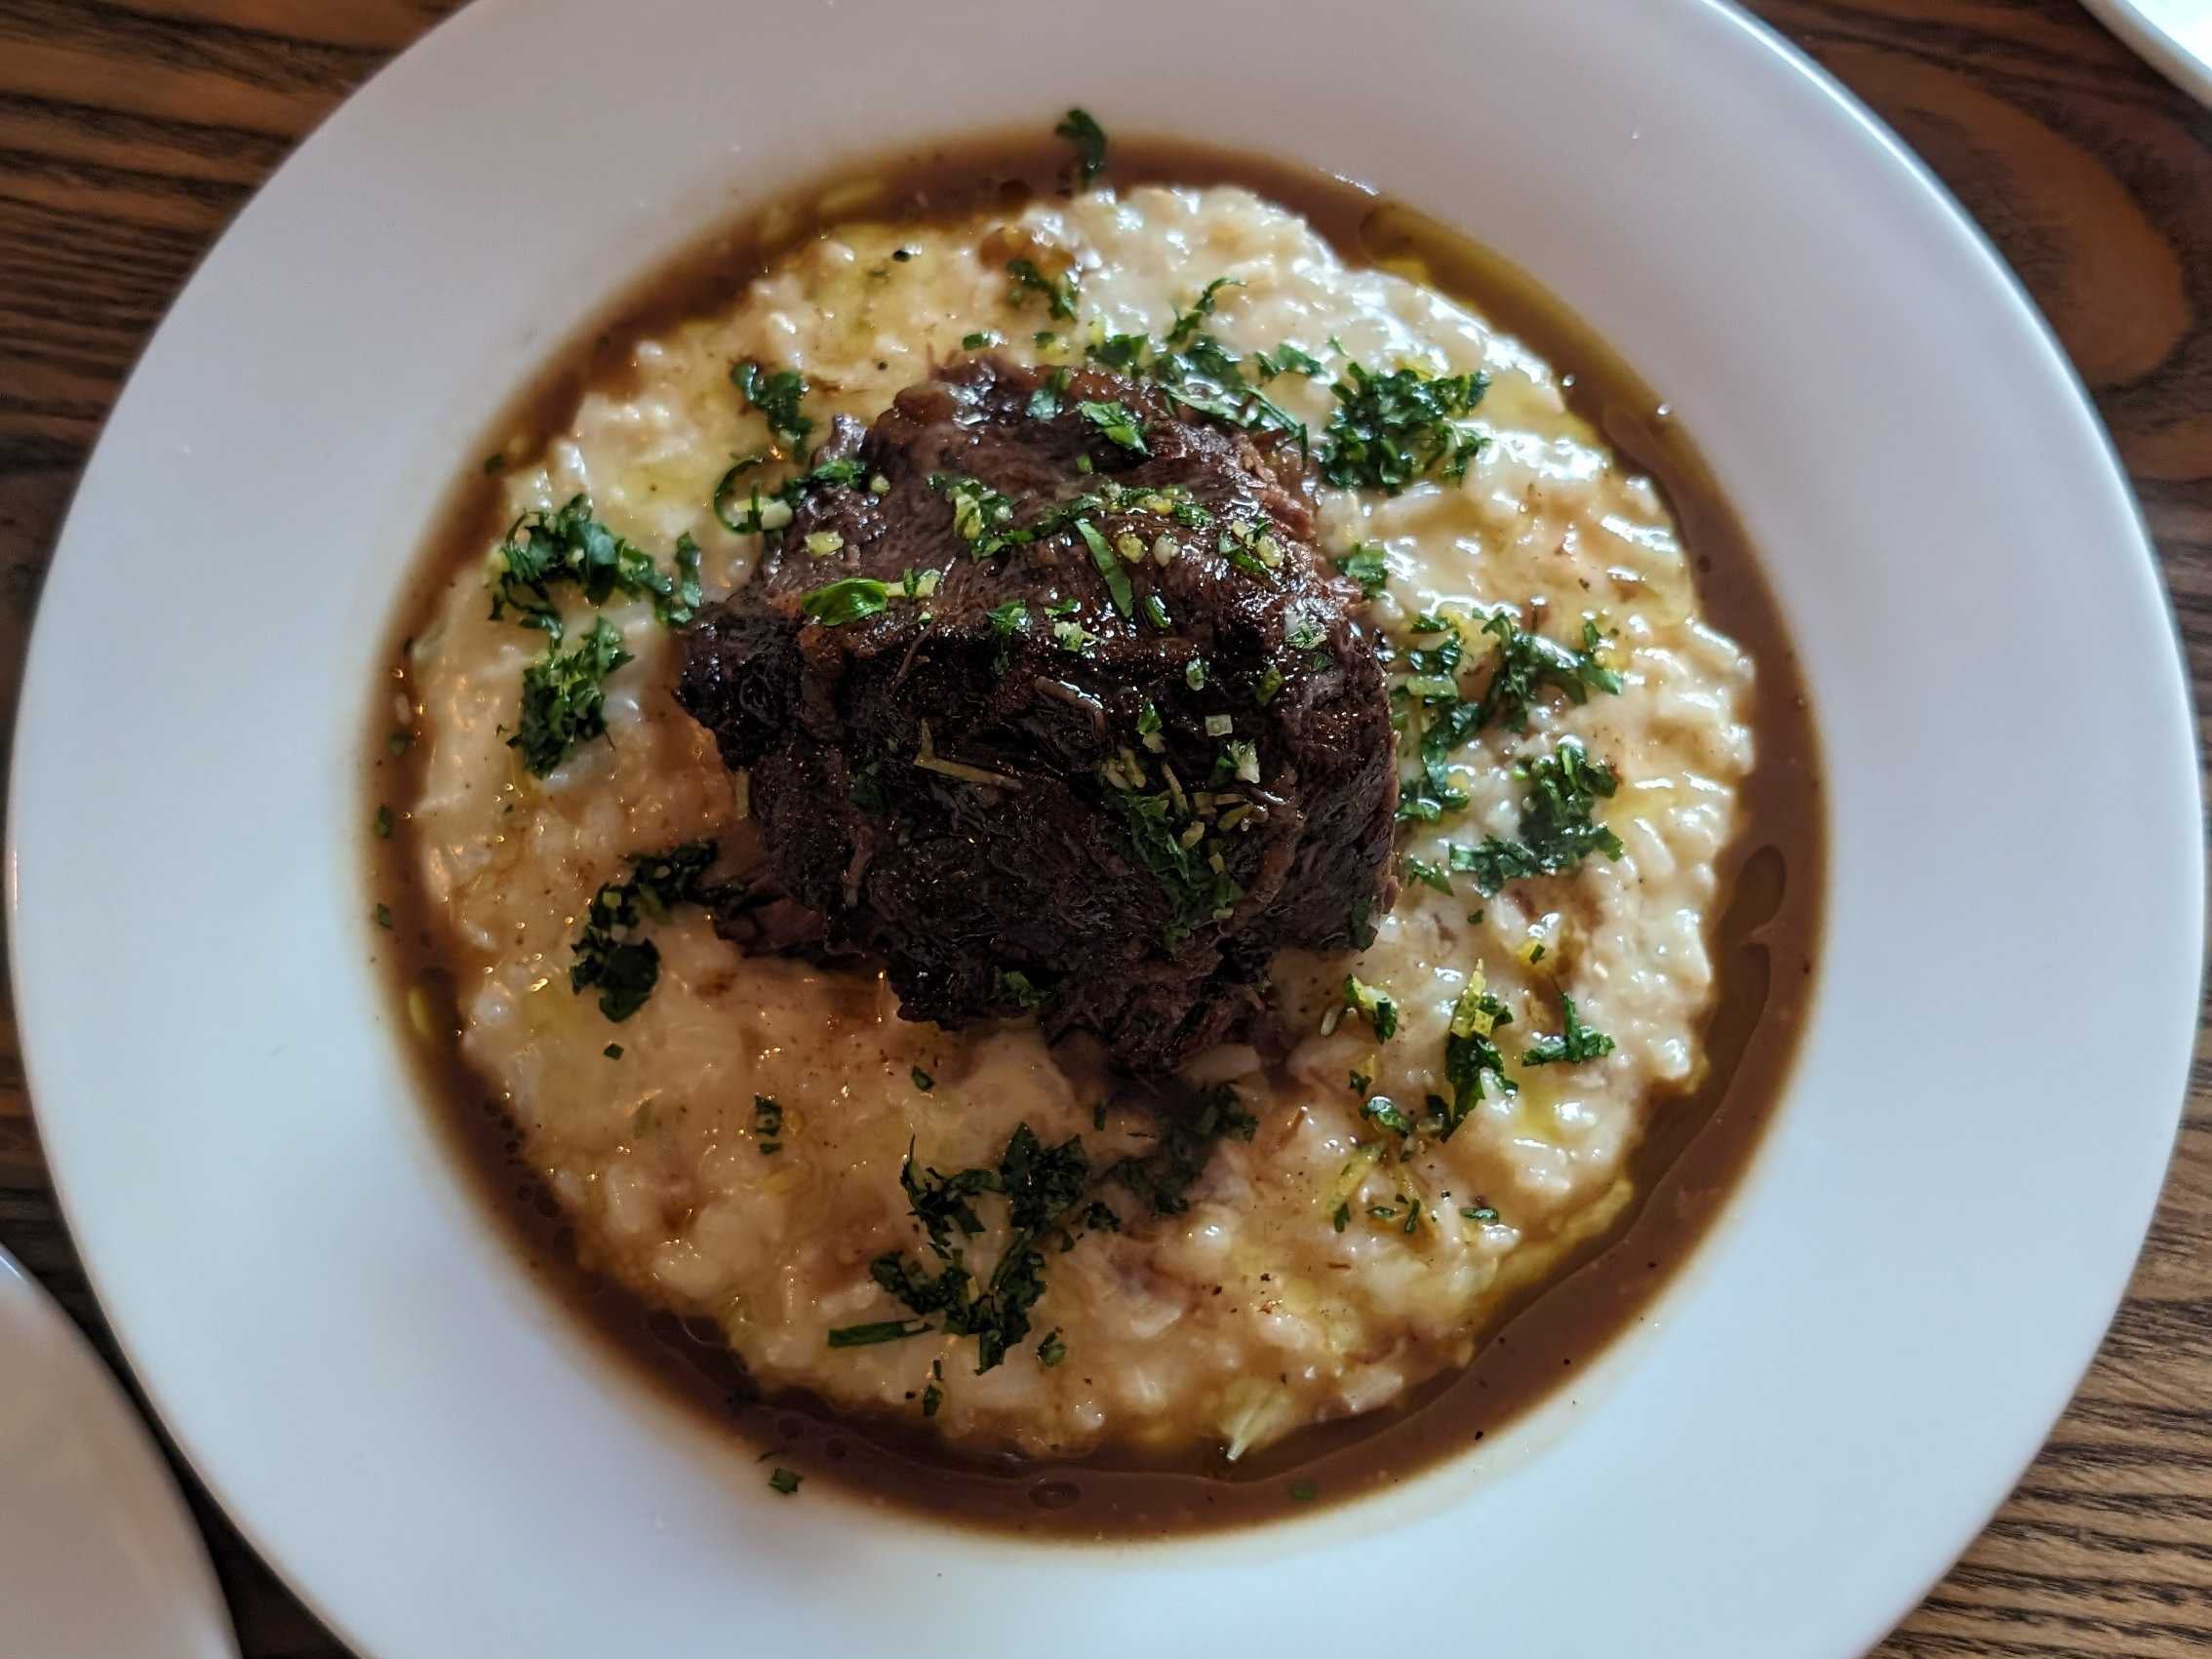 Small the restaurant might be, but the portions are not. Pictured: braised ox cheek, risotto, salsa verde